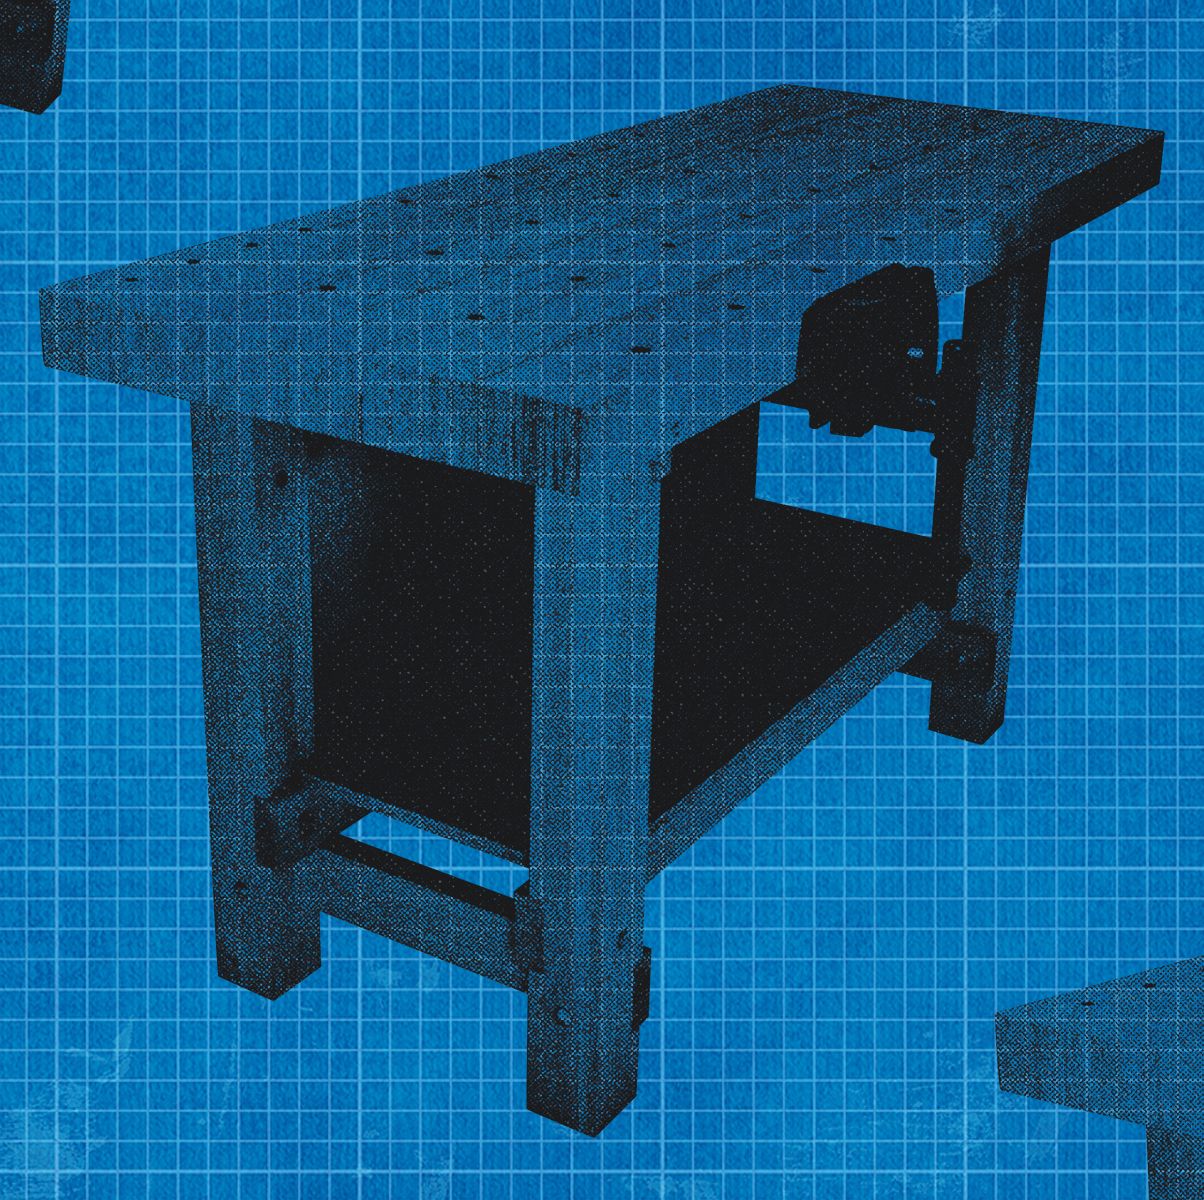 How To Build the Ultimate DIY Workbench